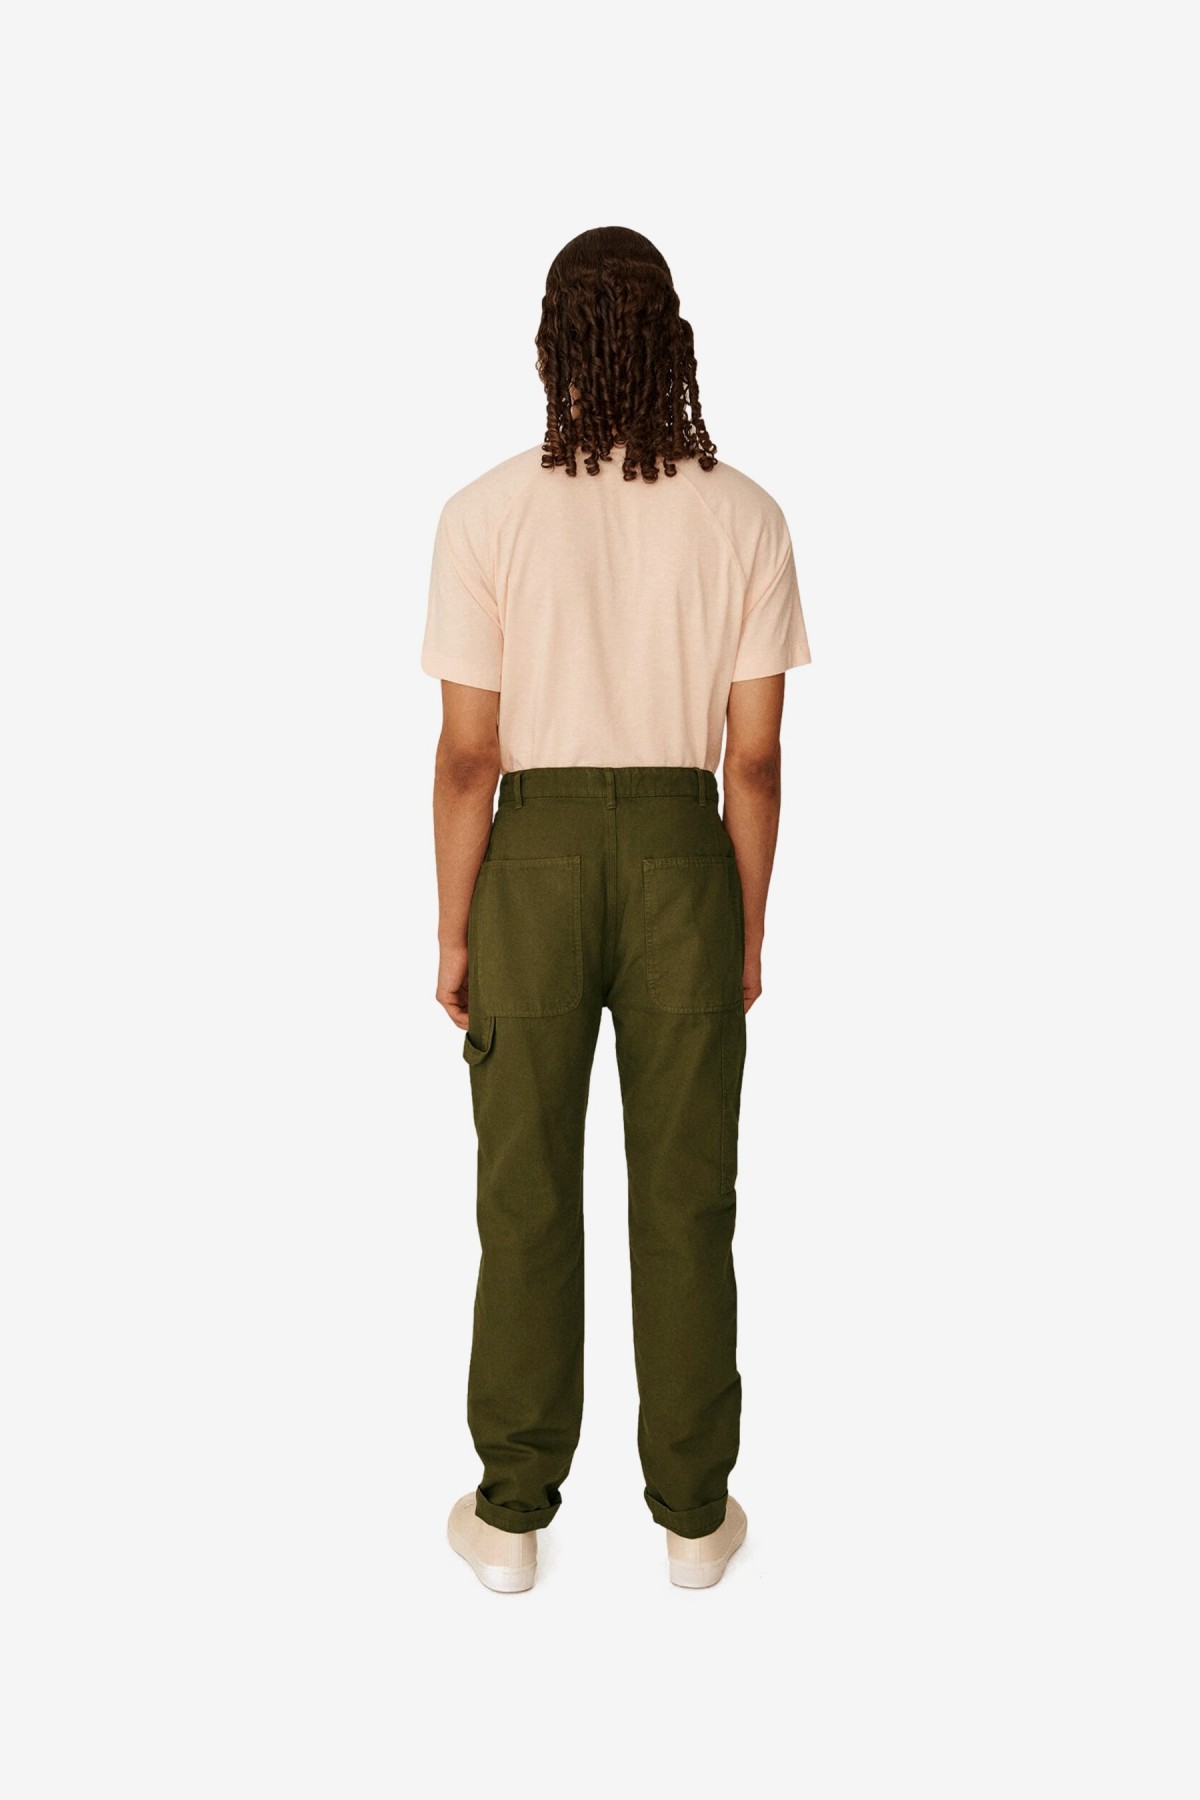 YMC You Must Create Painter Trouser in Olive